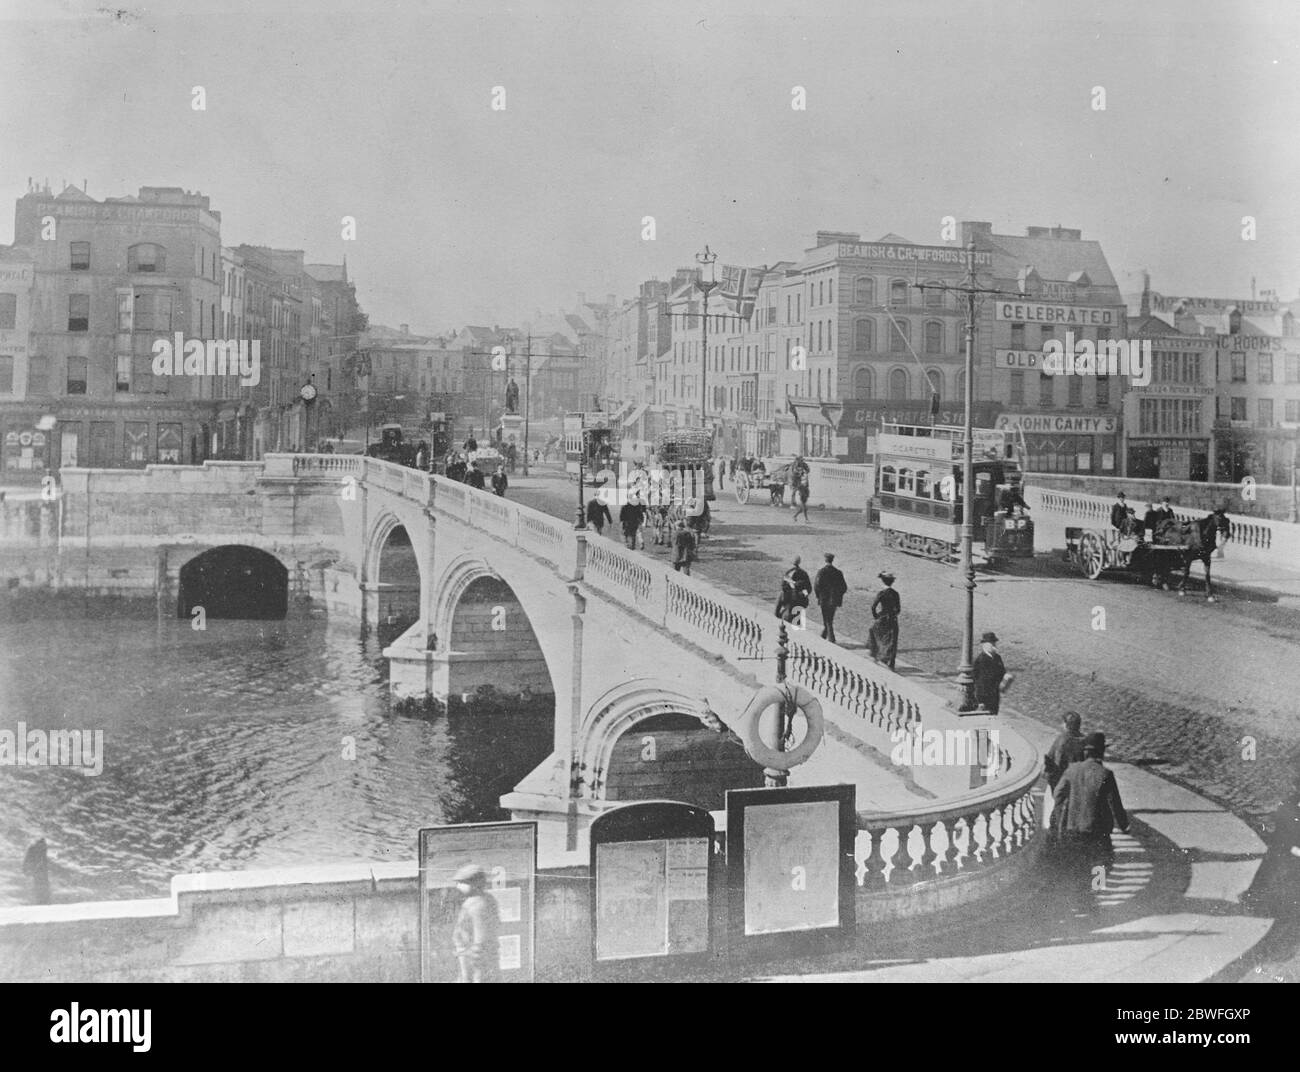 The burned city of Cork During the Irish War of Independence. Following an Irish Republican Army ambush of a British Auxiliary patrol in the city, Auxiliaries, Black and Tans and British soldiers set fire to a number of houses and then looted and burned numerous buildings in the city center here St Patrick 's bridge December 14 1920 Stock Photo